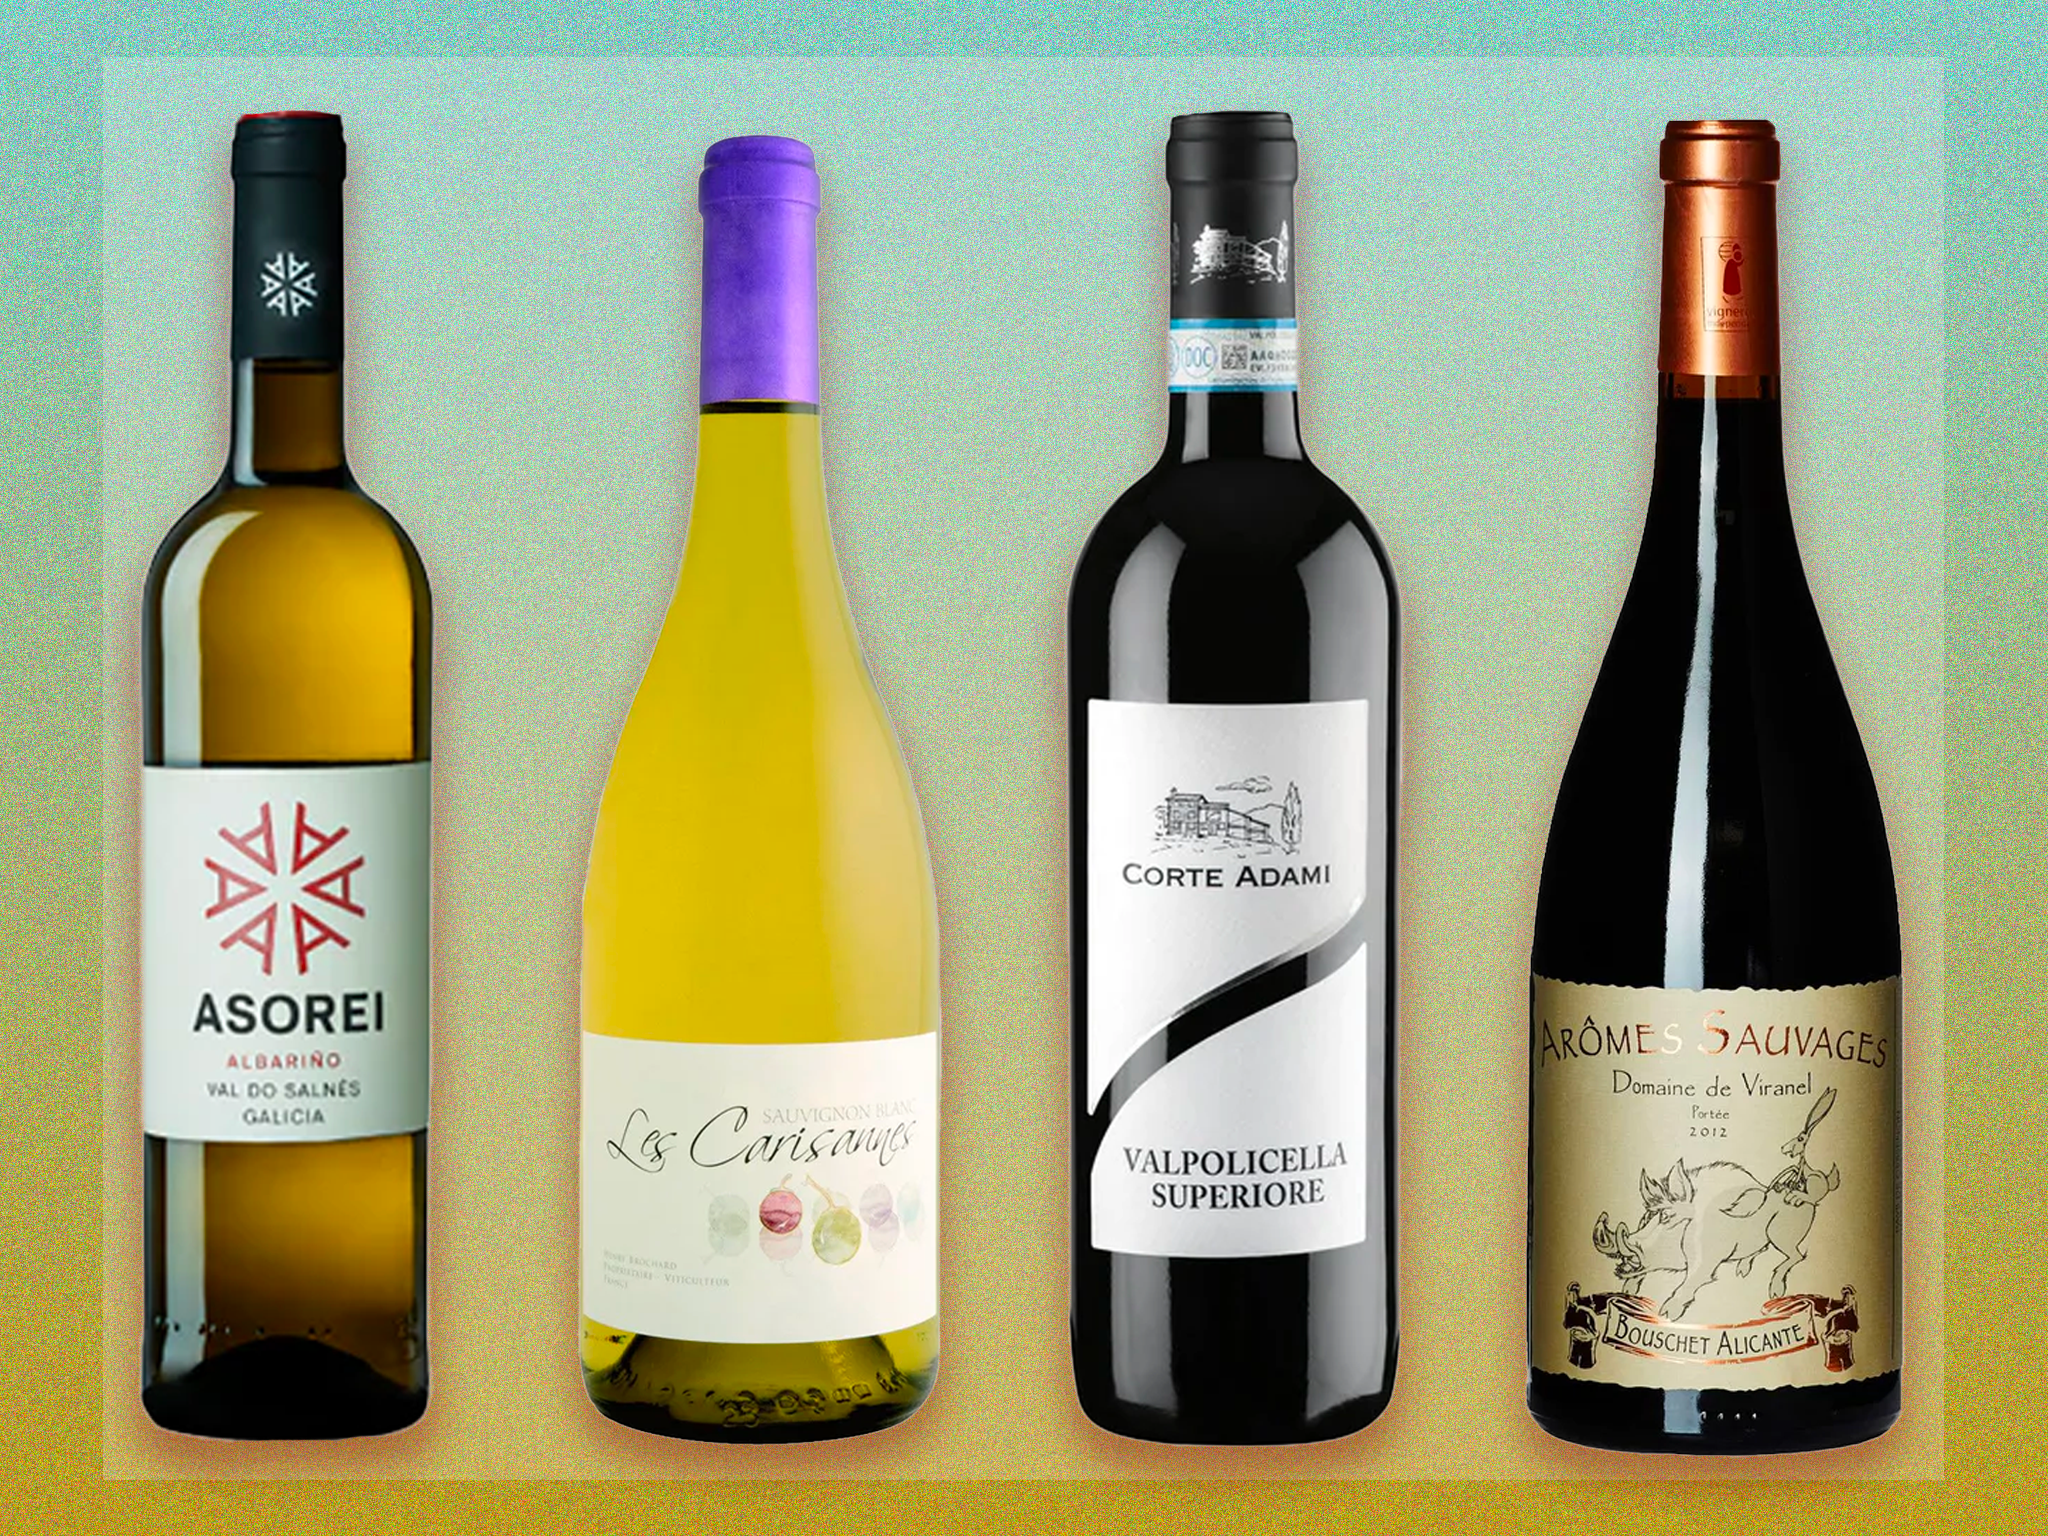 Connoisseur’s choice: Six wines to savour, according to an expert